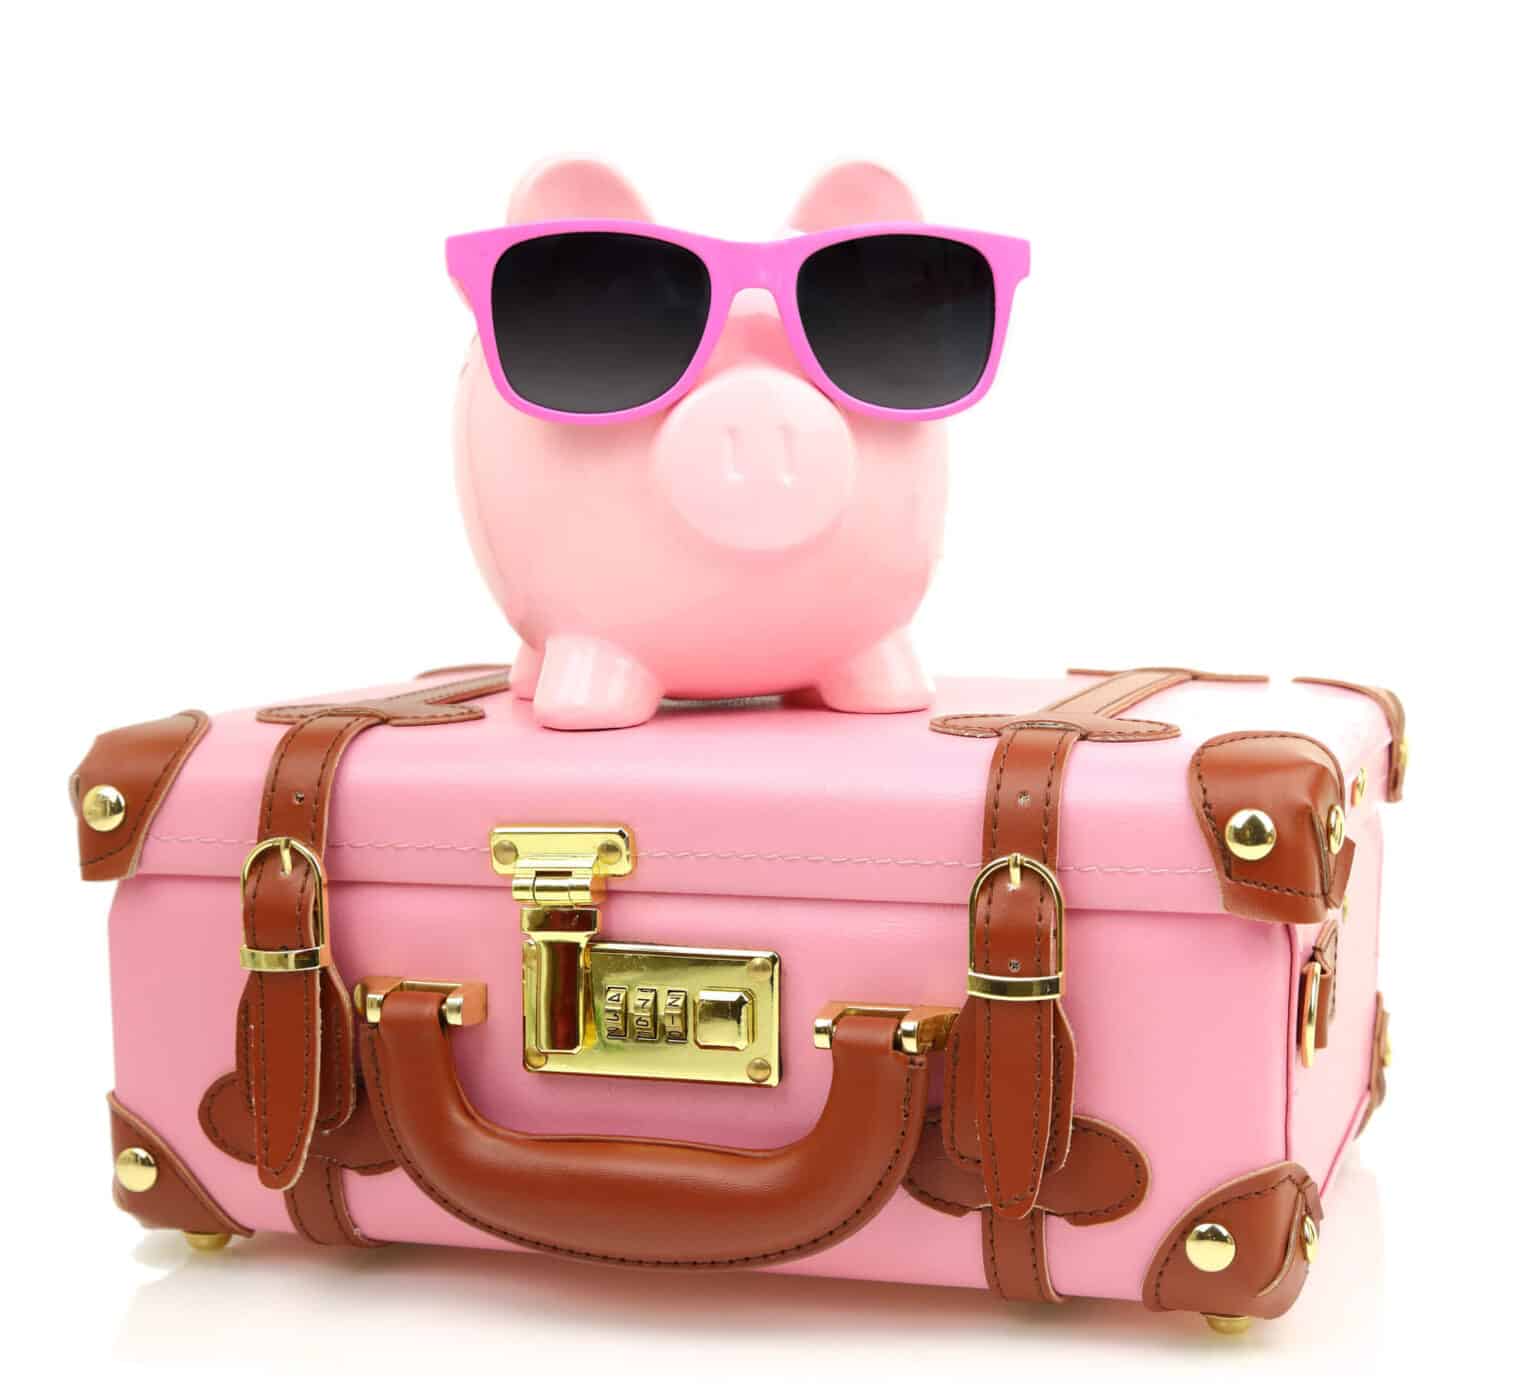 Piggy Bank For Adults 1536x1390 